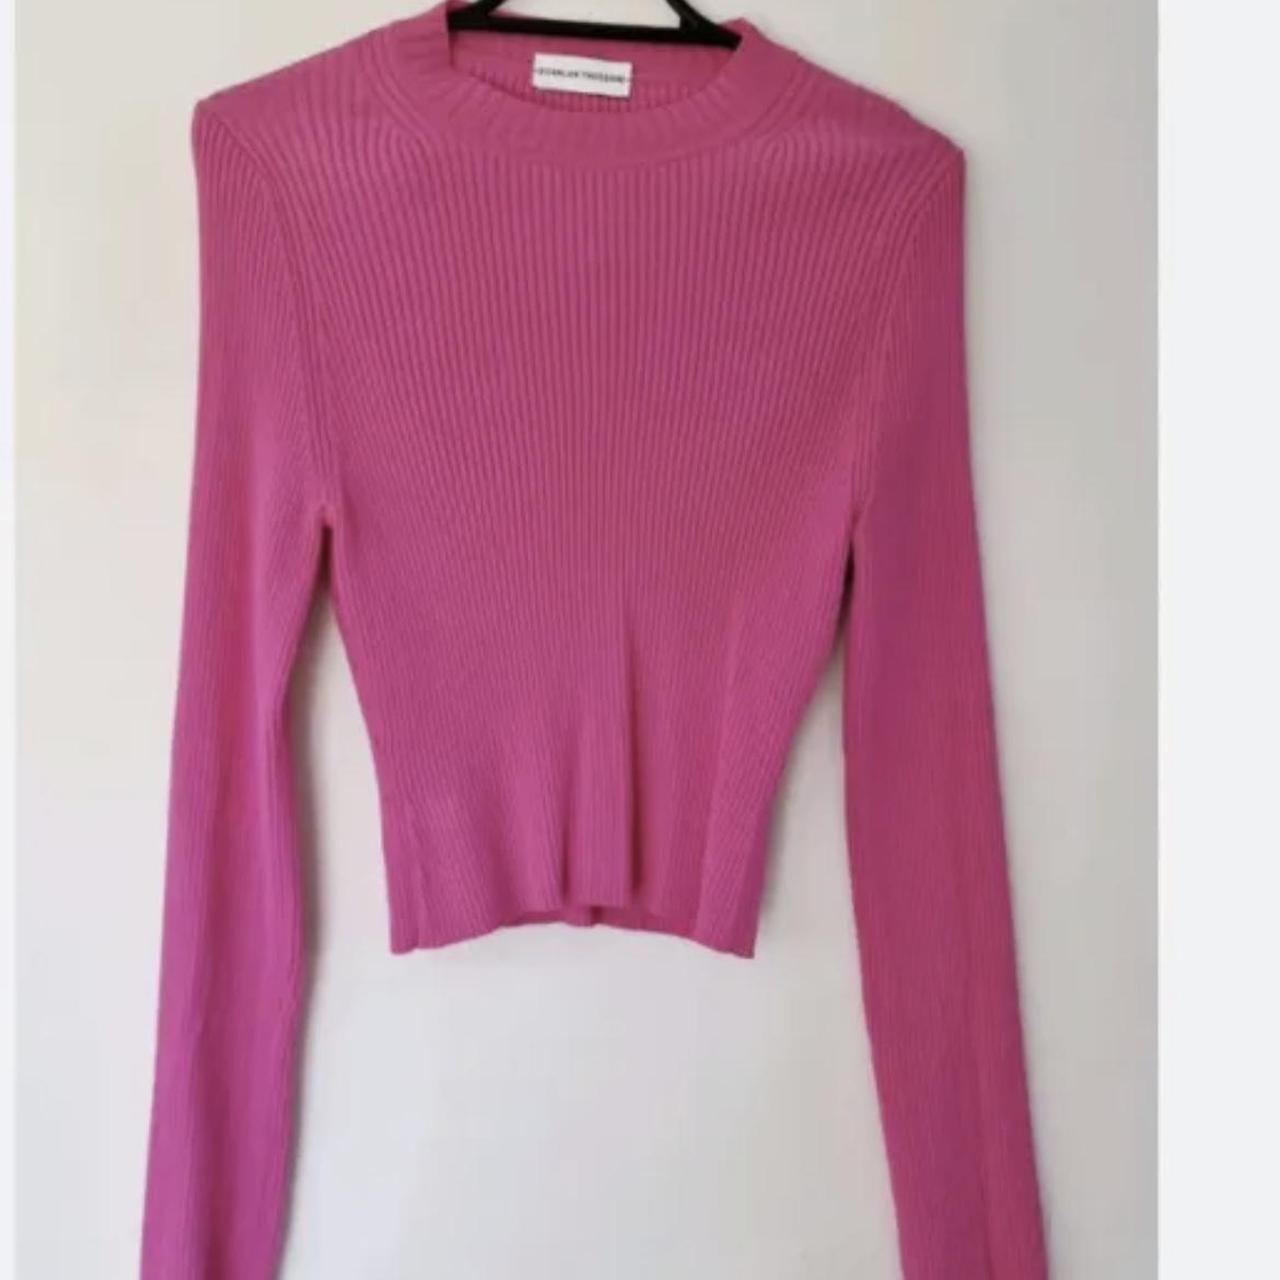 Pink scanlan theodore jumper xs crepe knit The most... - Depop